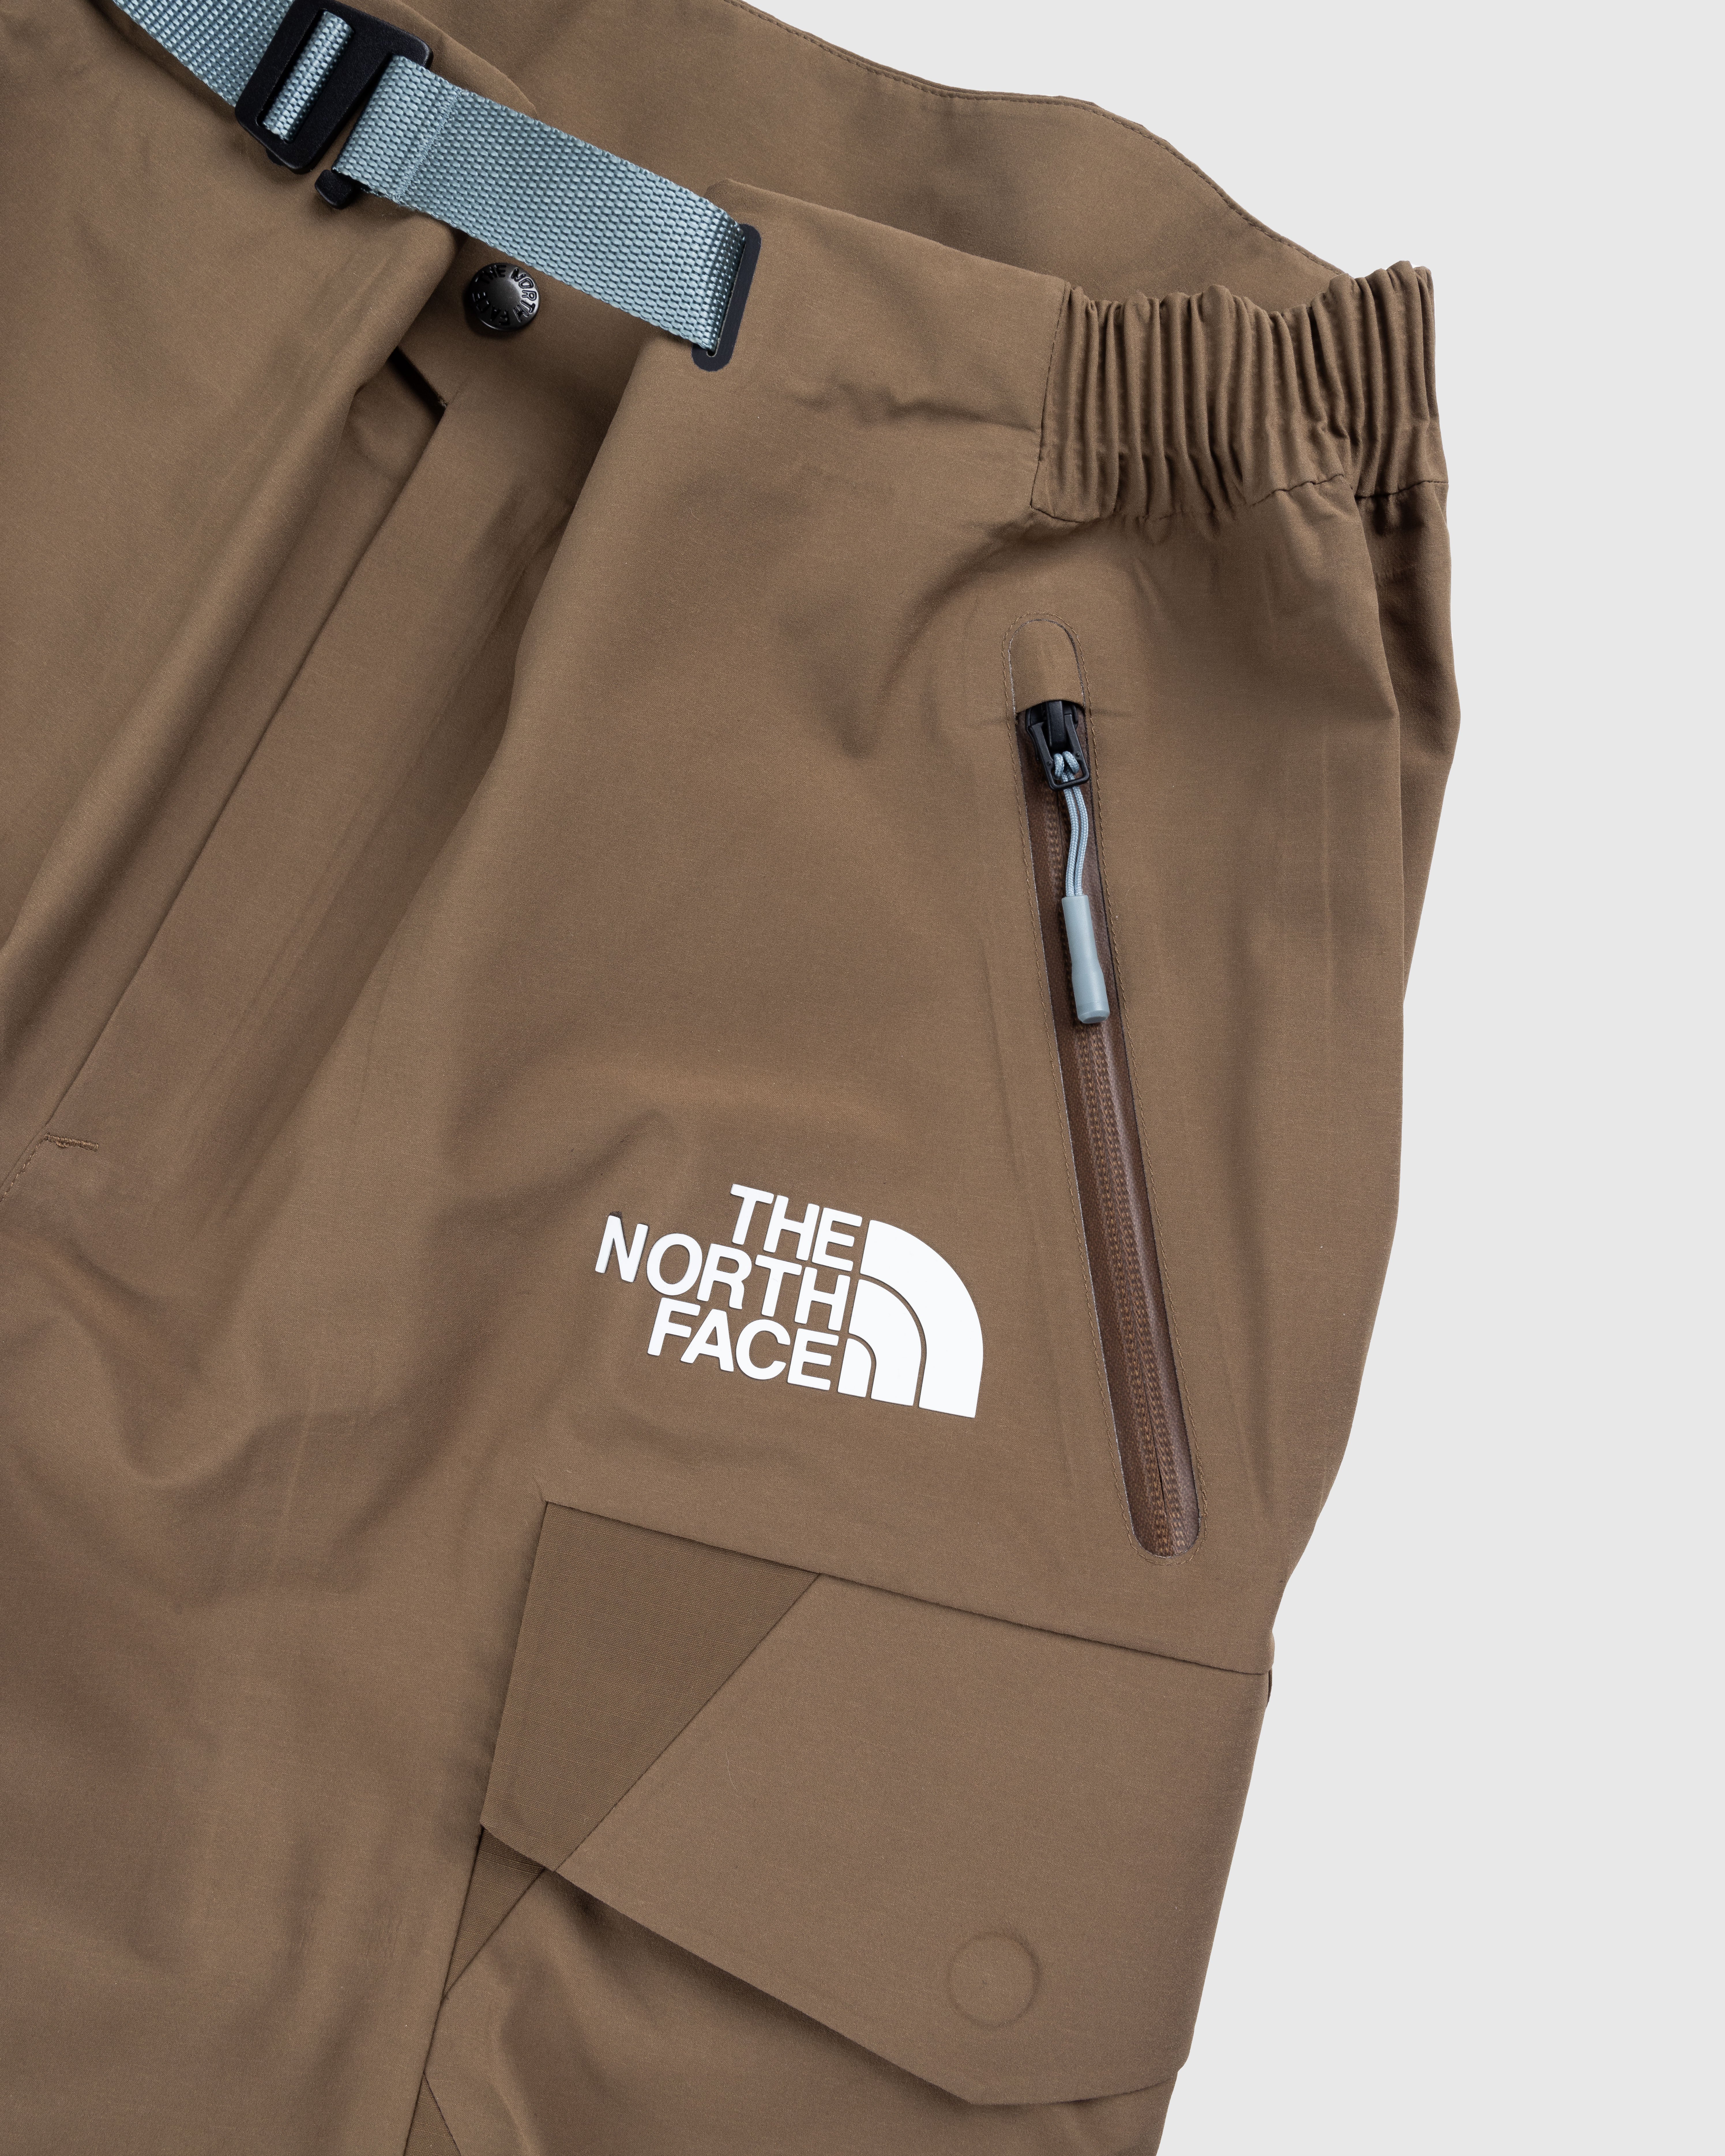 The North Face x UNDERCOVER - Geodesic Shell Pants Sepia Brown - Clothing - Brown - Image 6